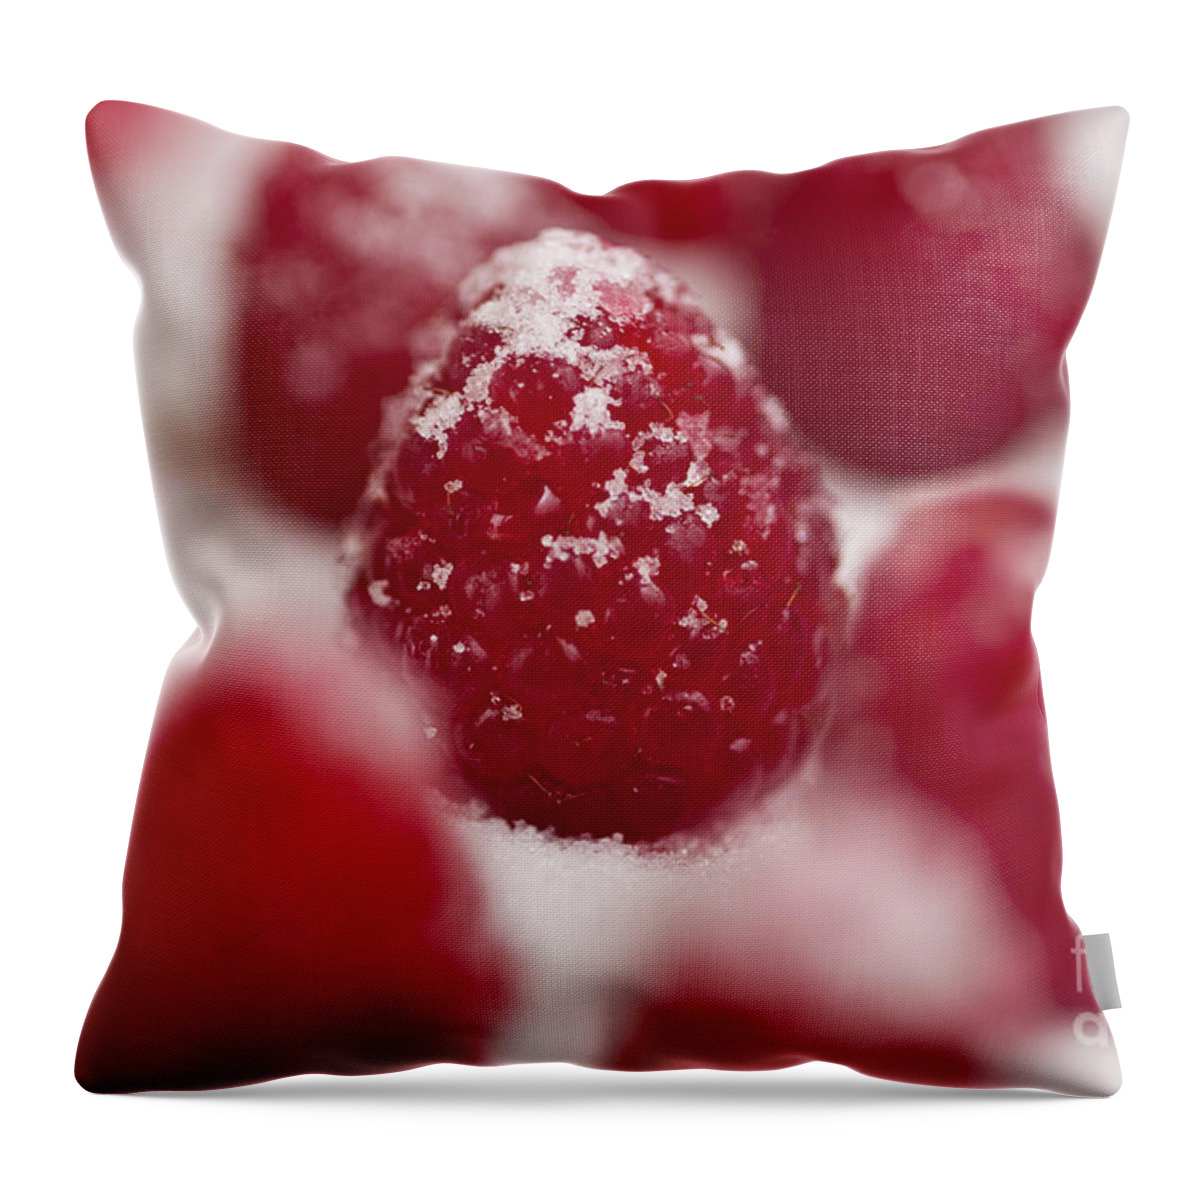 Abundance Throw Pillow featuring the photograph Raspberries Sprinkled With Sugar by Jim Corwin